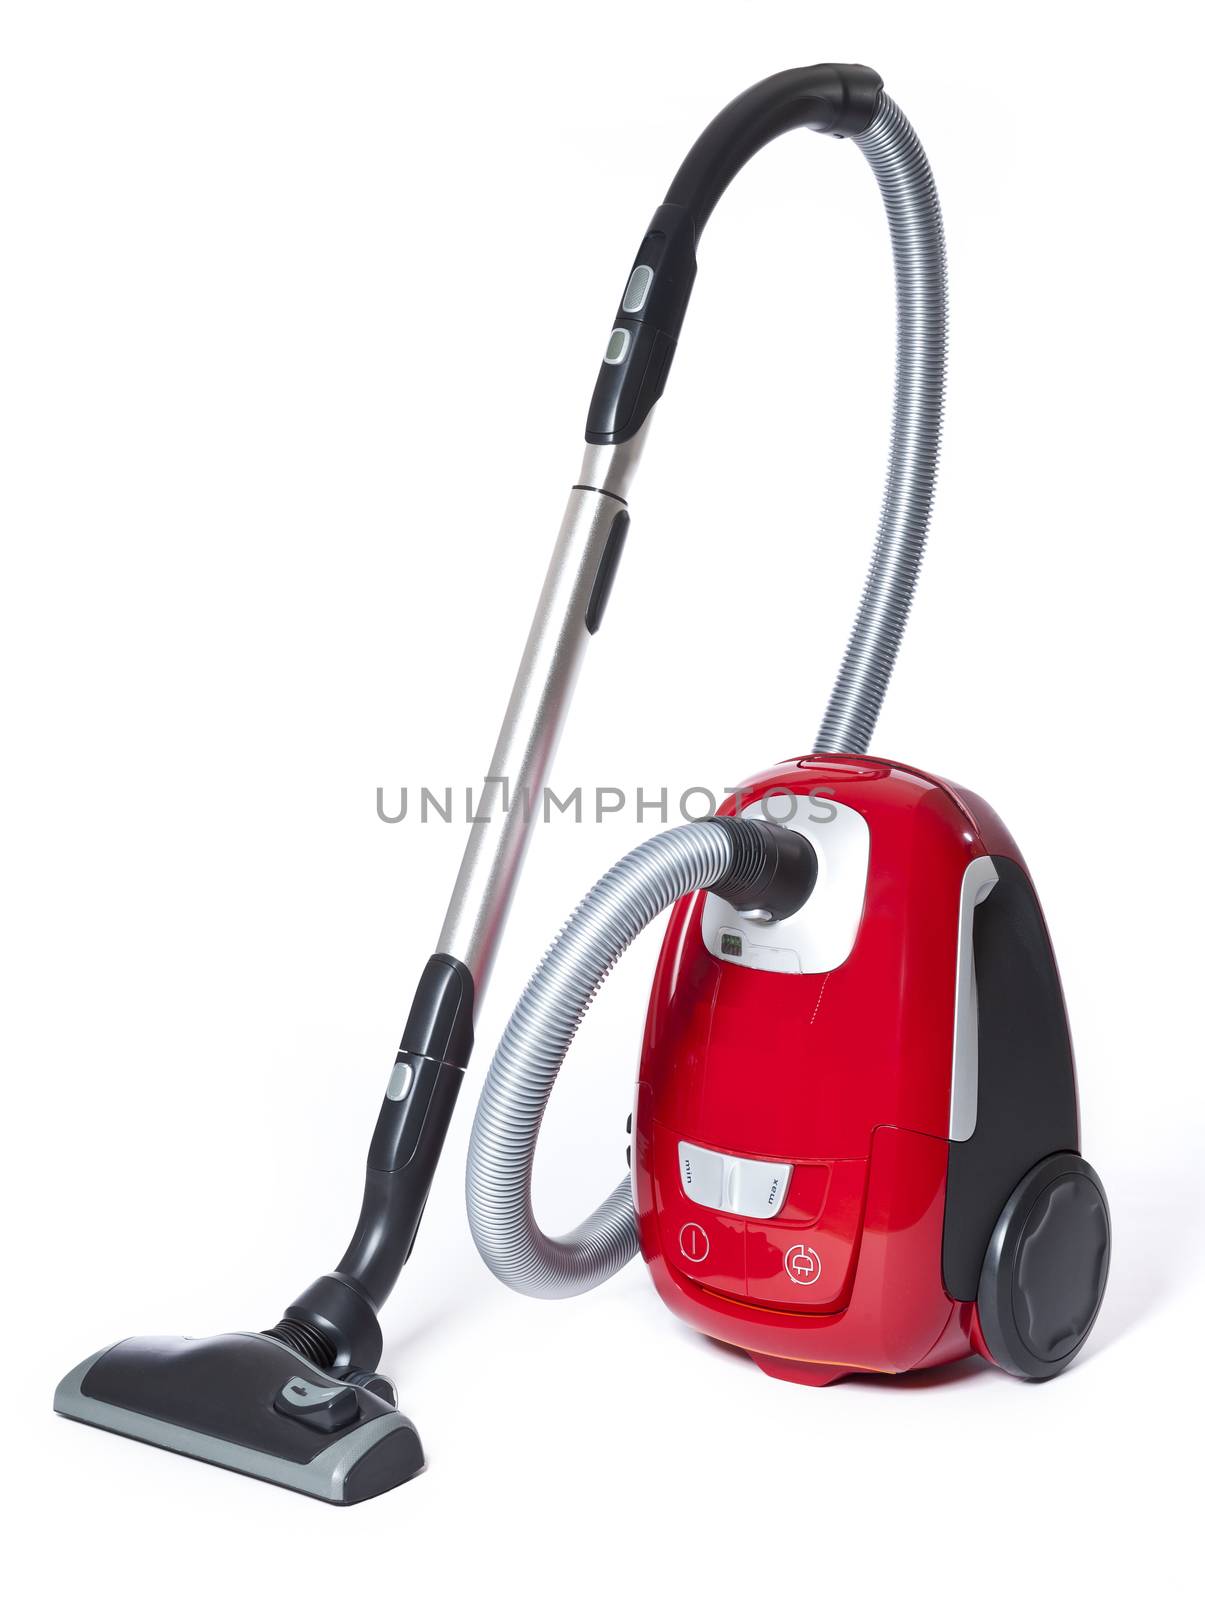 Vacuum Cleaner isolated on white background